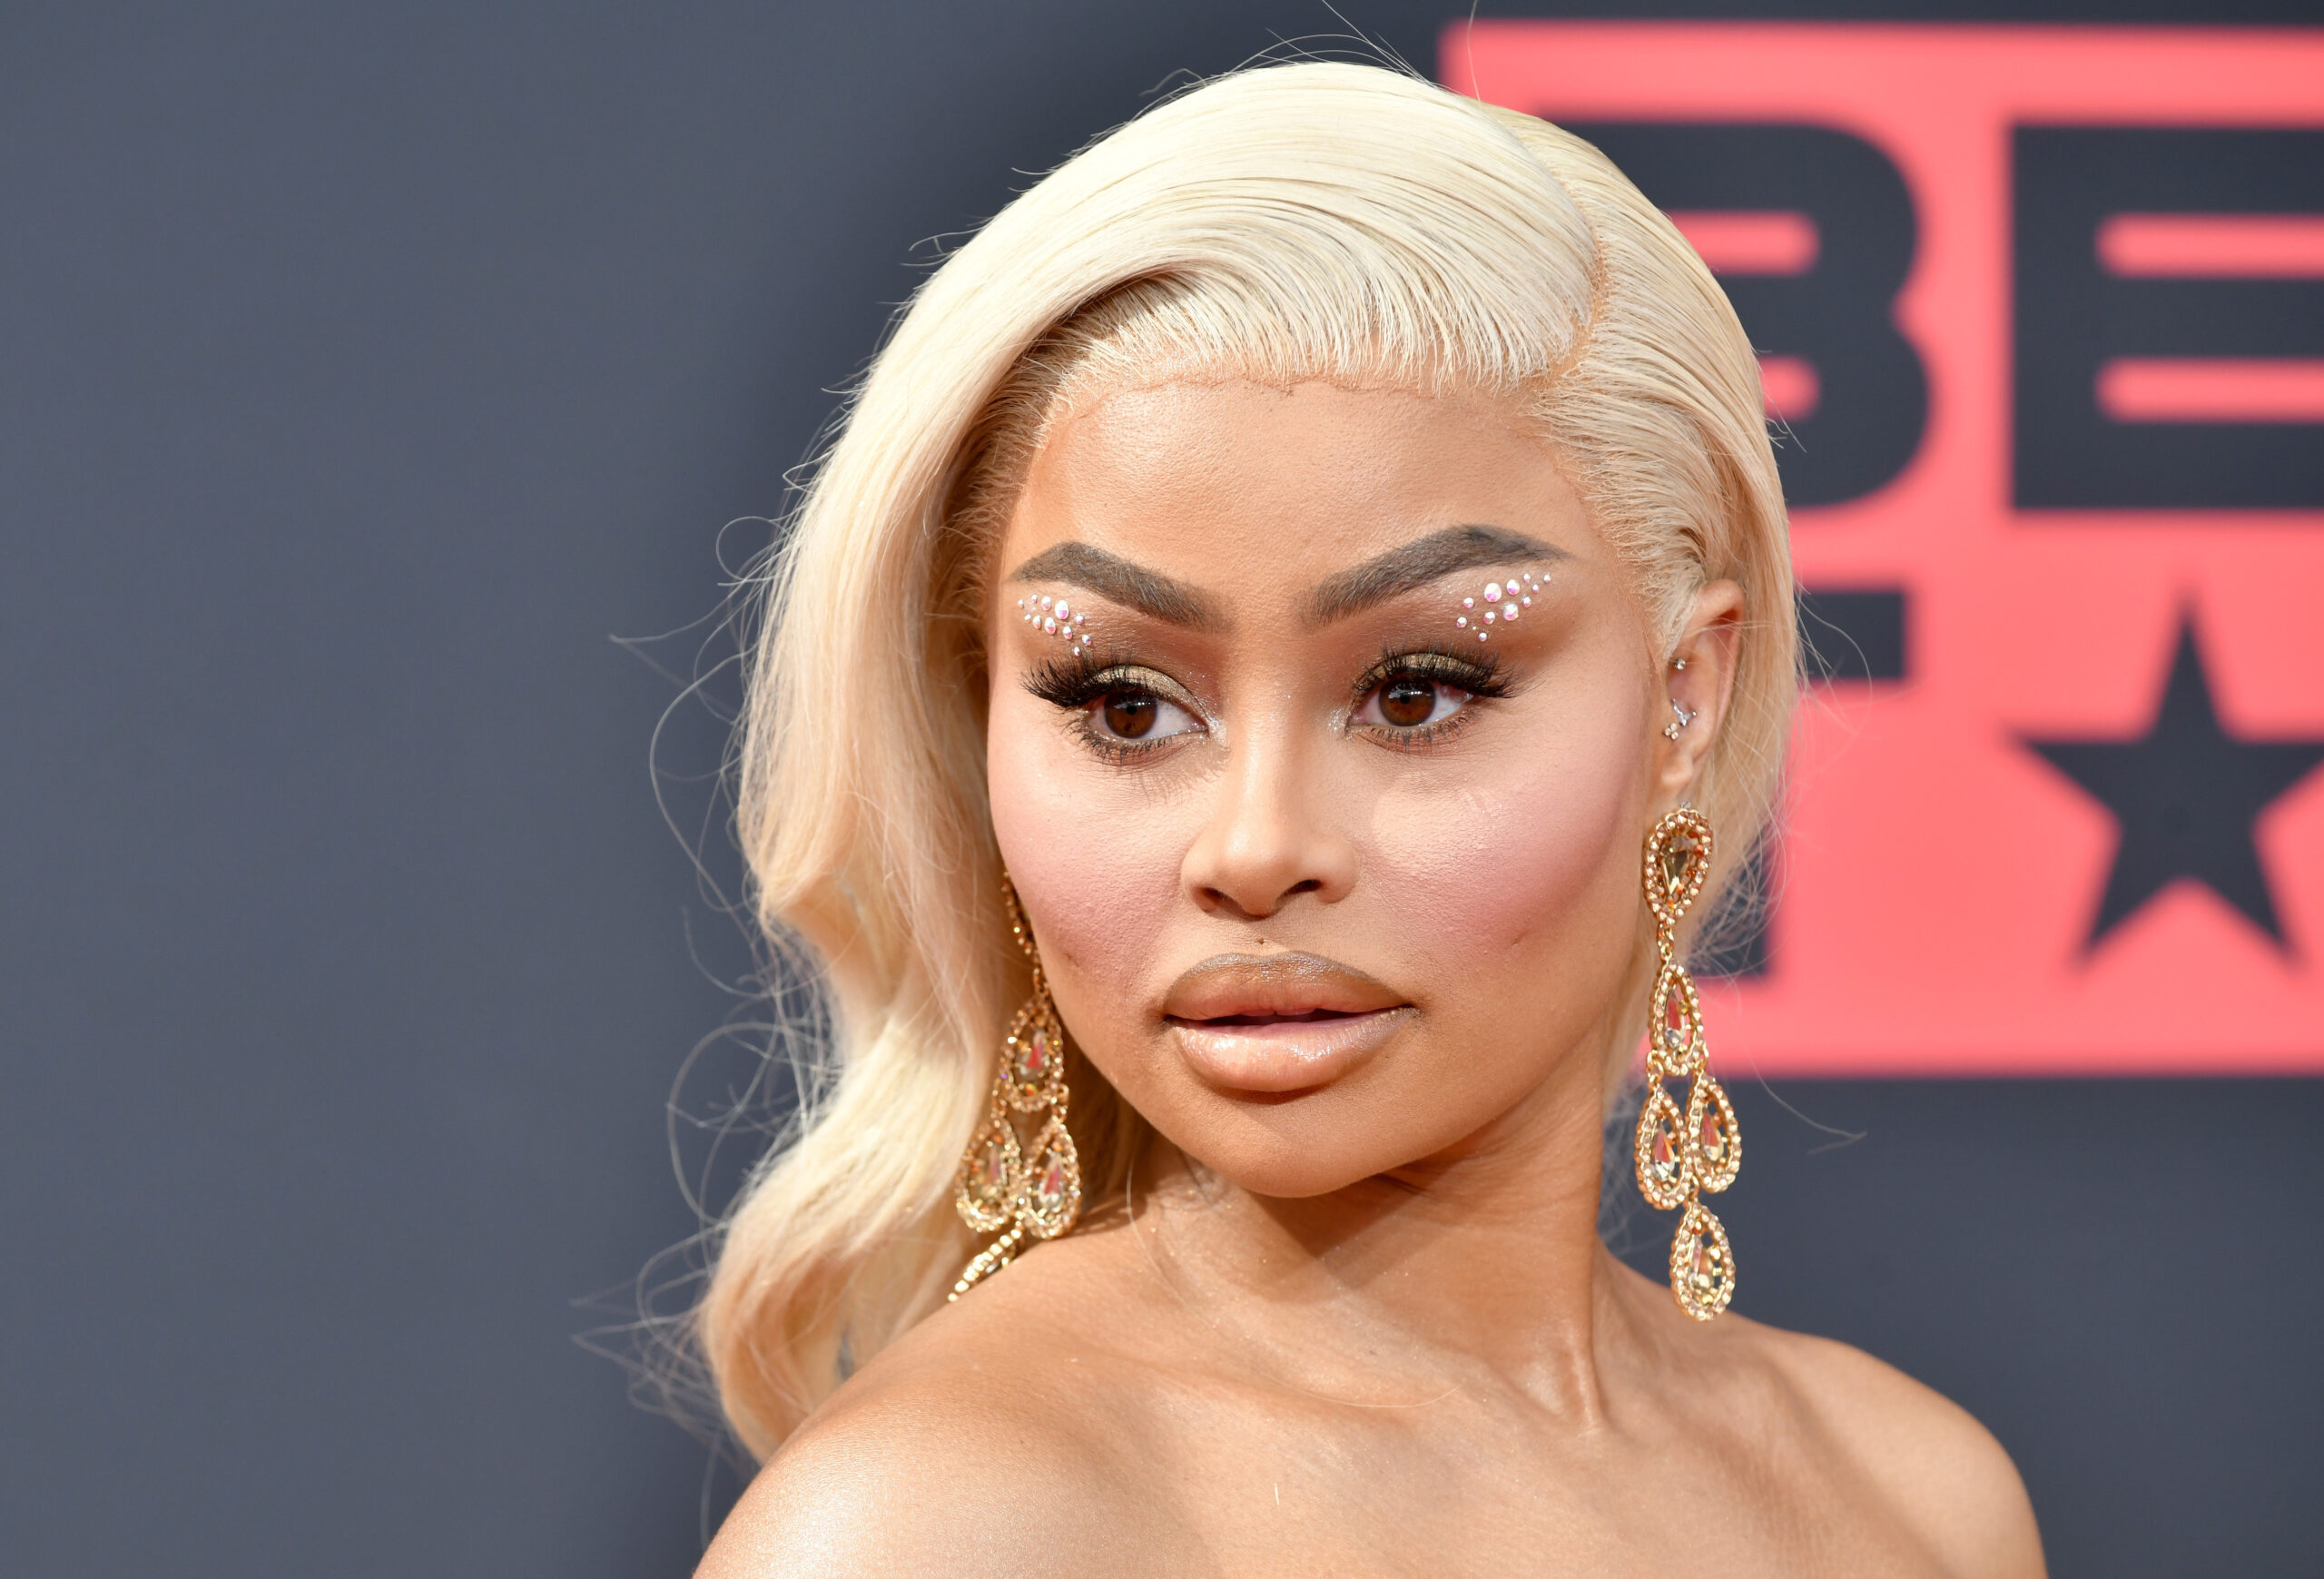 Blac Chyna Quits OnlyFans, Dissolves Fillers After Becoming A Christian: ‘Now I’m Just Going By Faith’